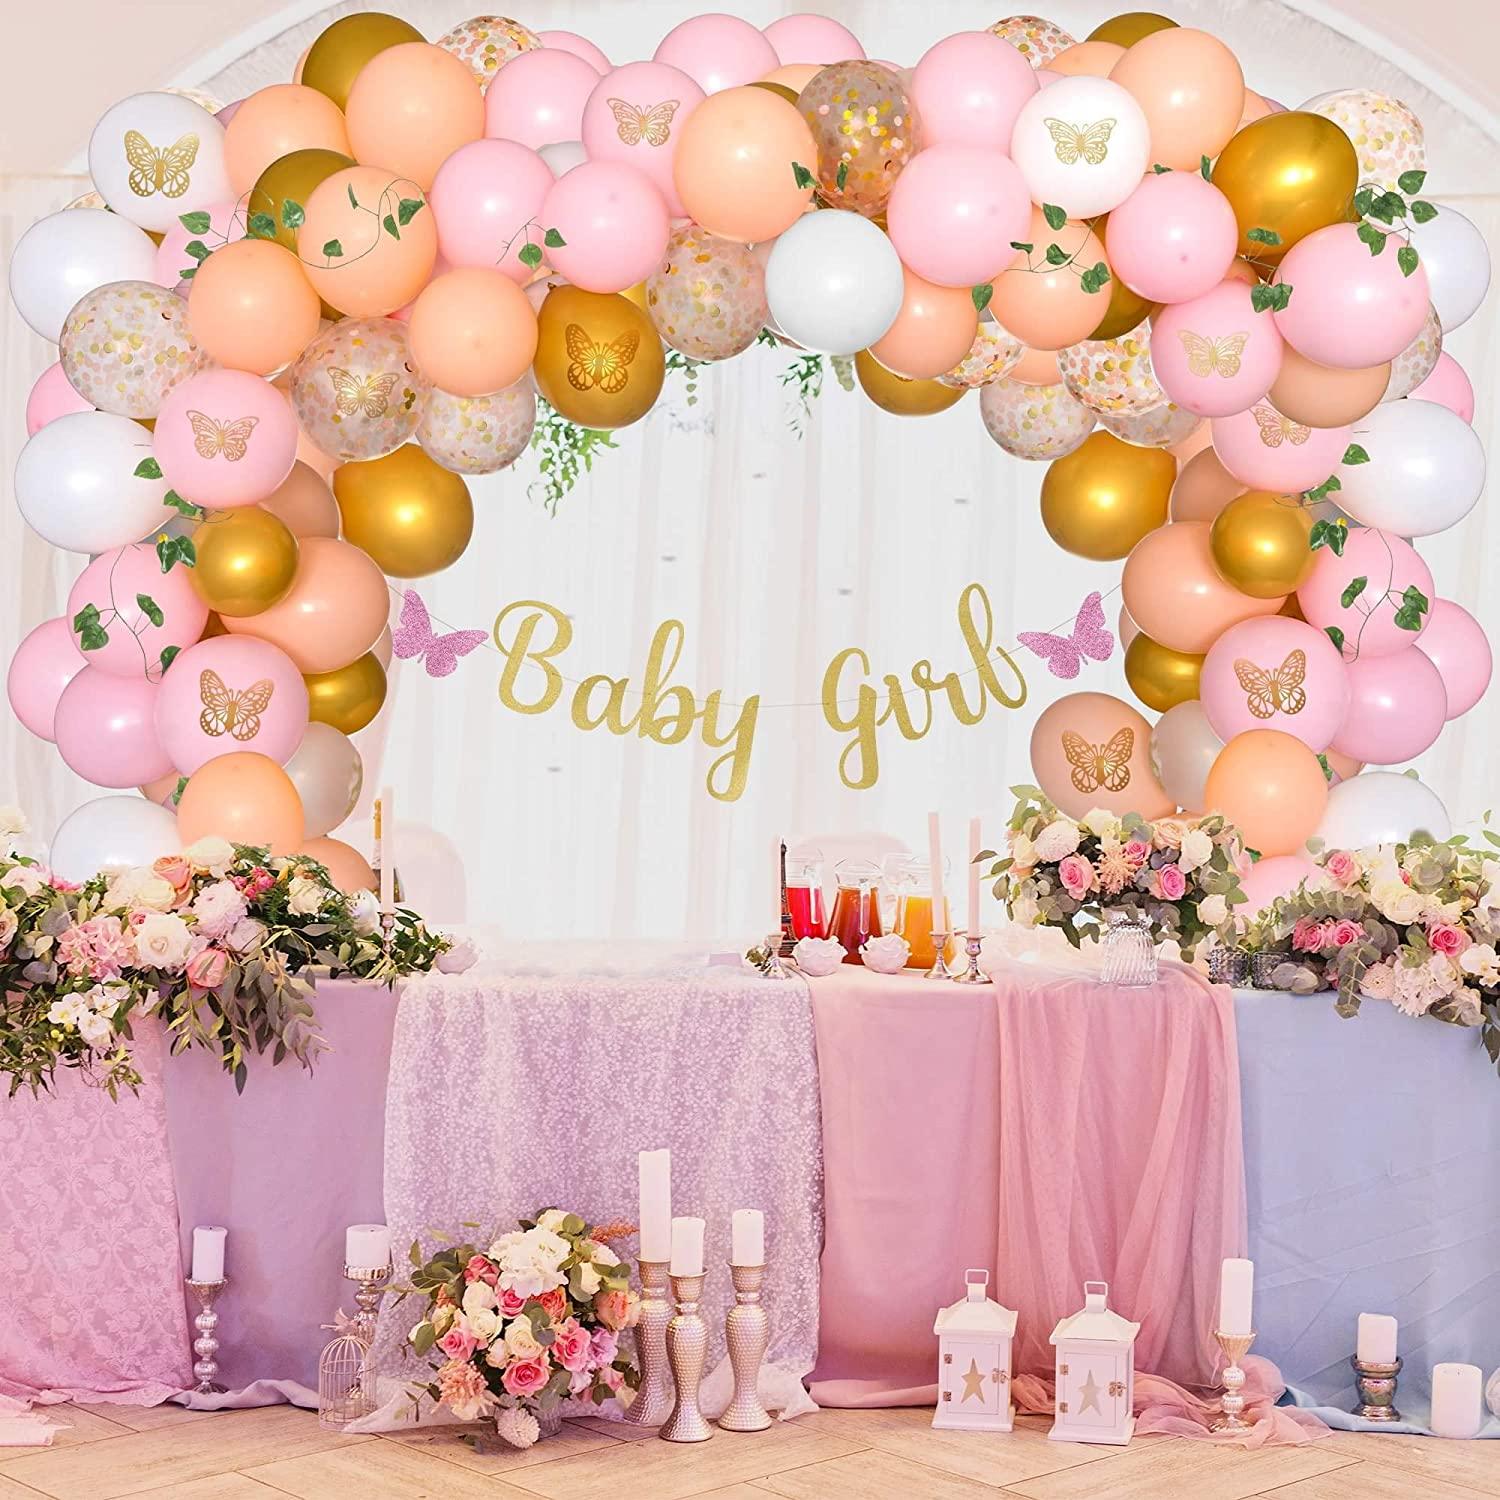 110 Piece Butterfly Garden Baby Shower Decorations For Girl – Pink Balloon Garland Arch Kit Decor - If you say i do